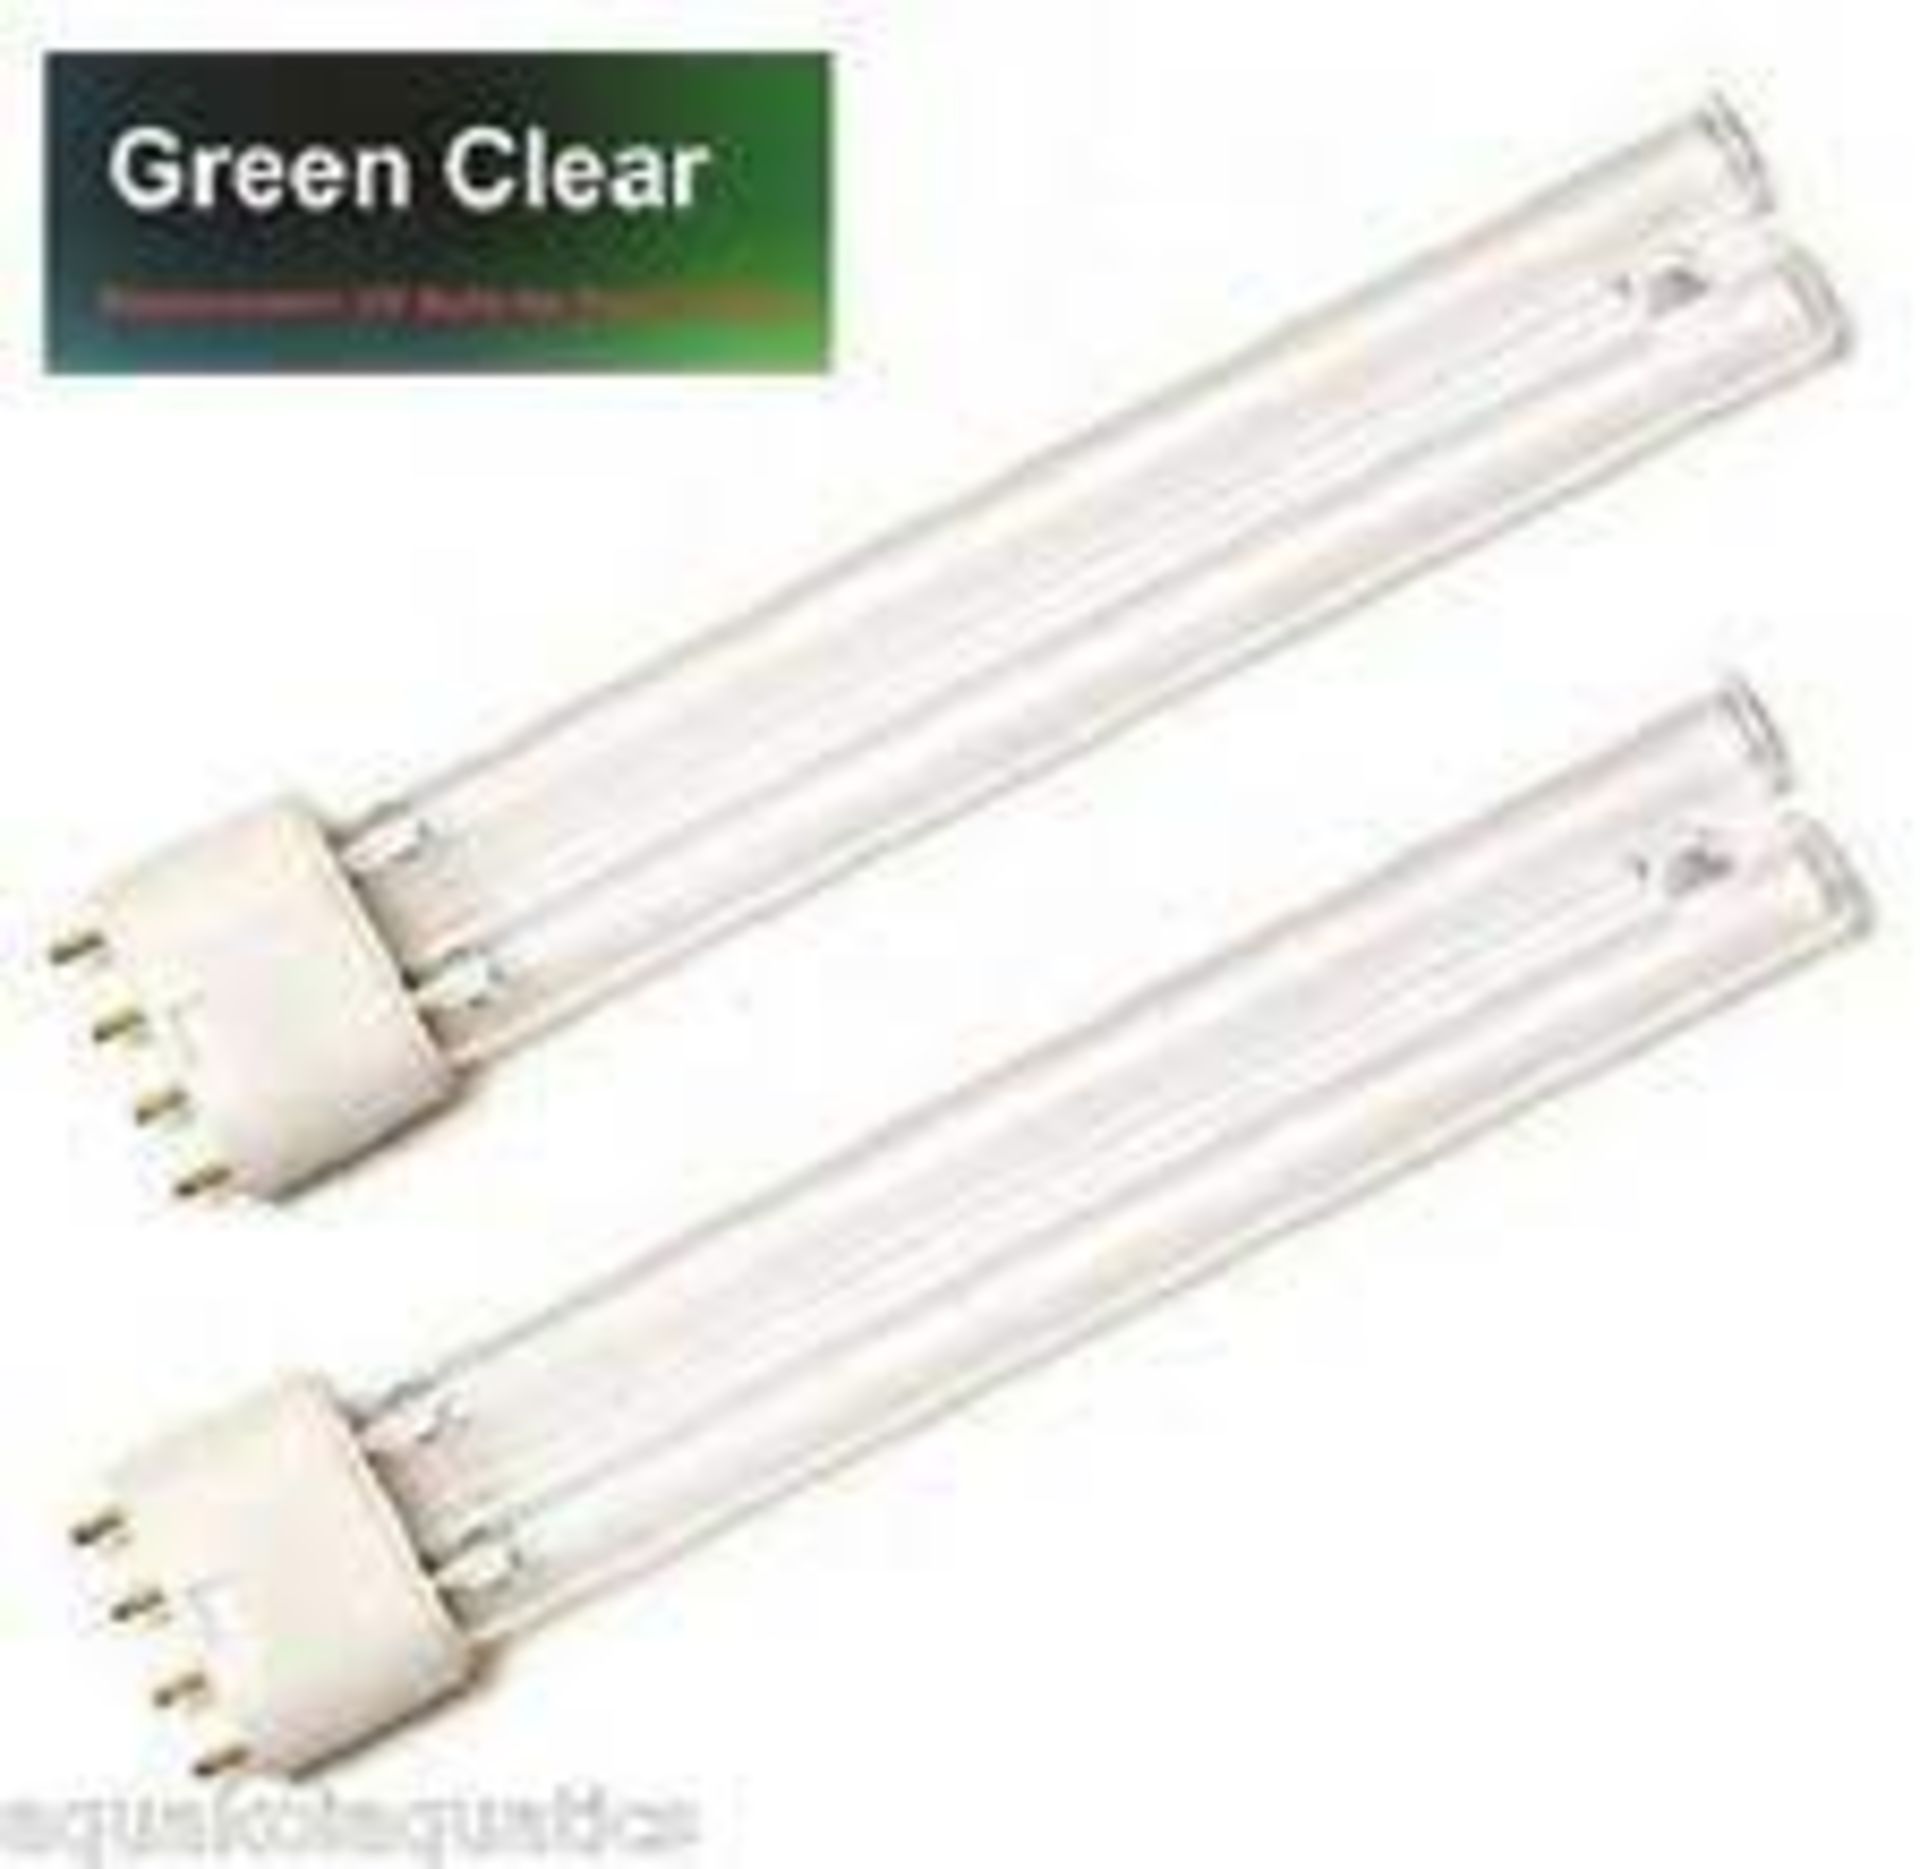 25 X BRAND NEW GREEN CLEAR 36W PLL PREMIUM BULBS FOR AQUATIC FILTERS RRP £38 EACH R16-11 - Image 2 of 2